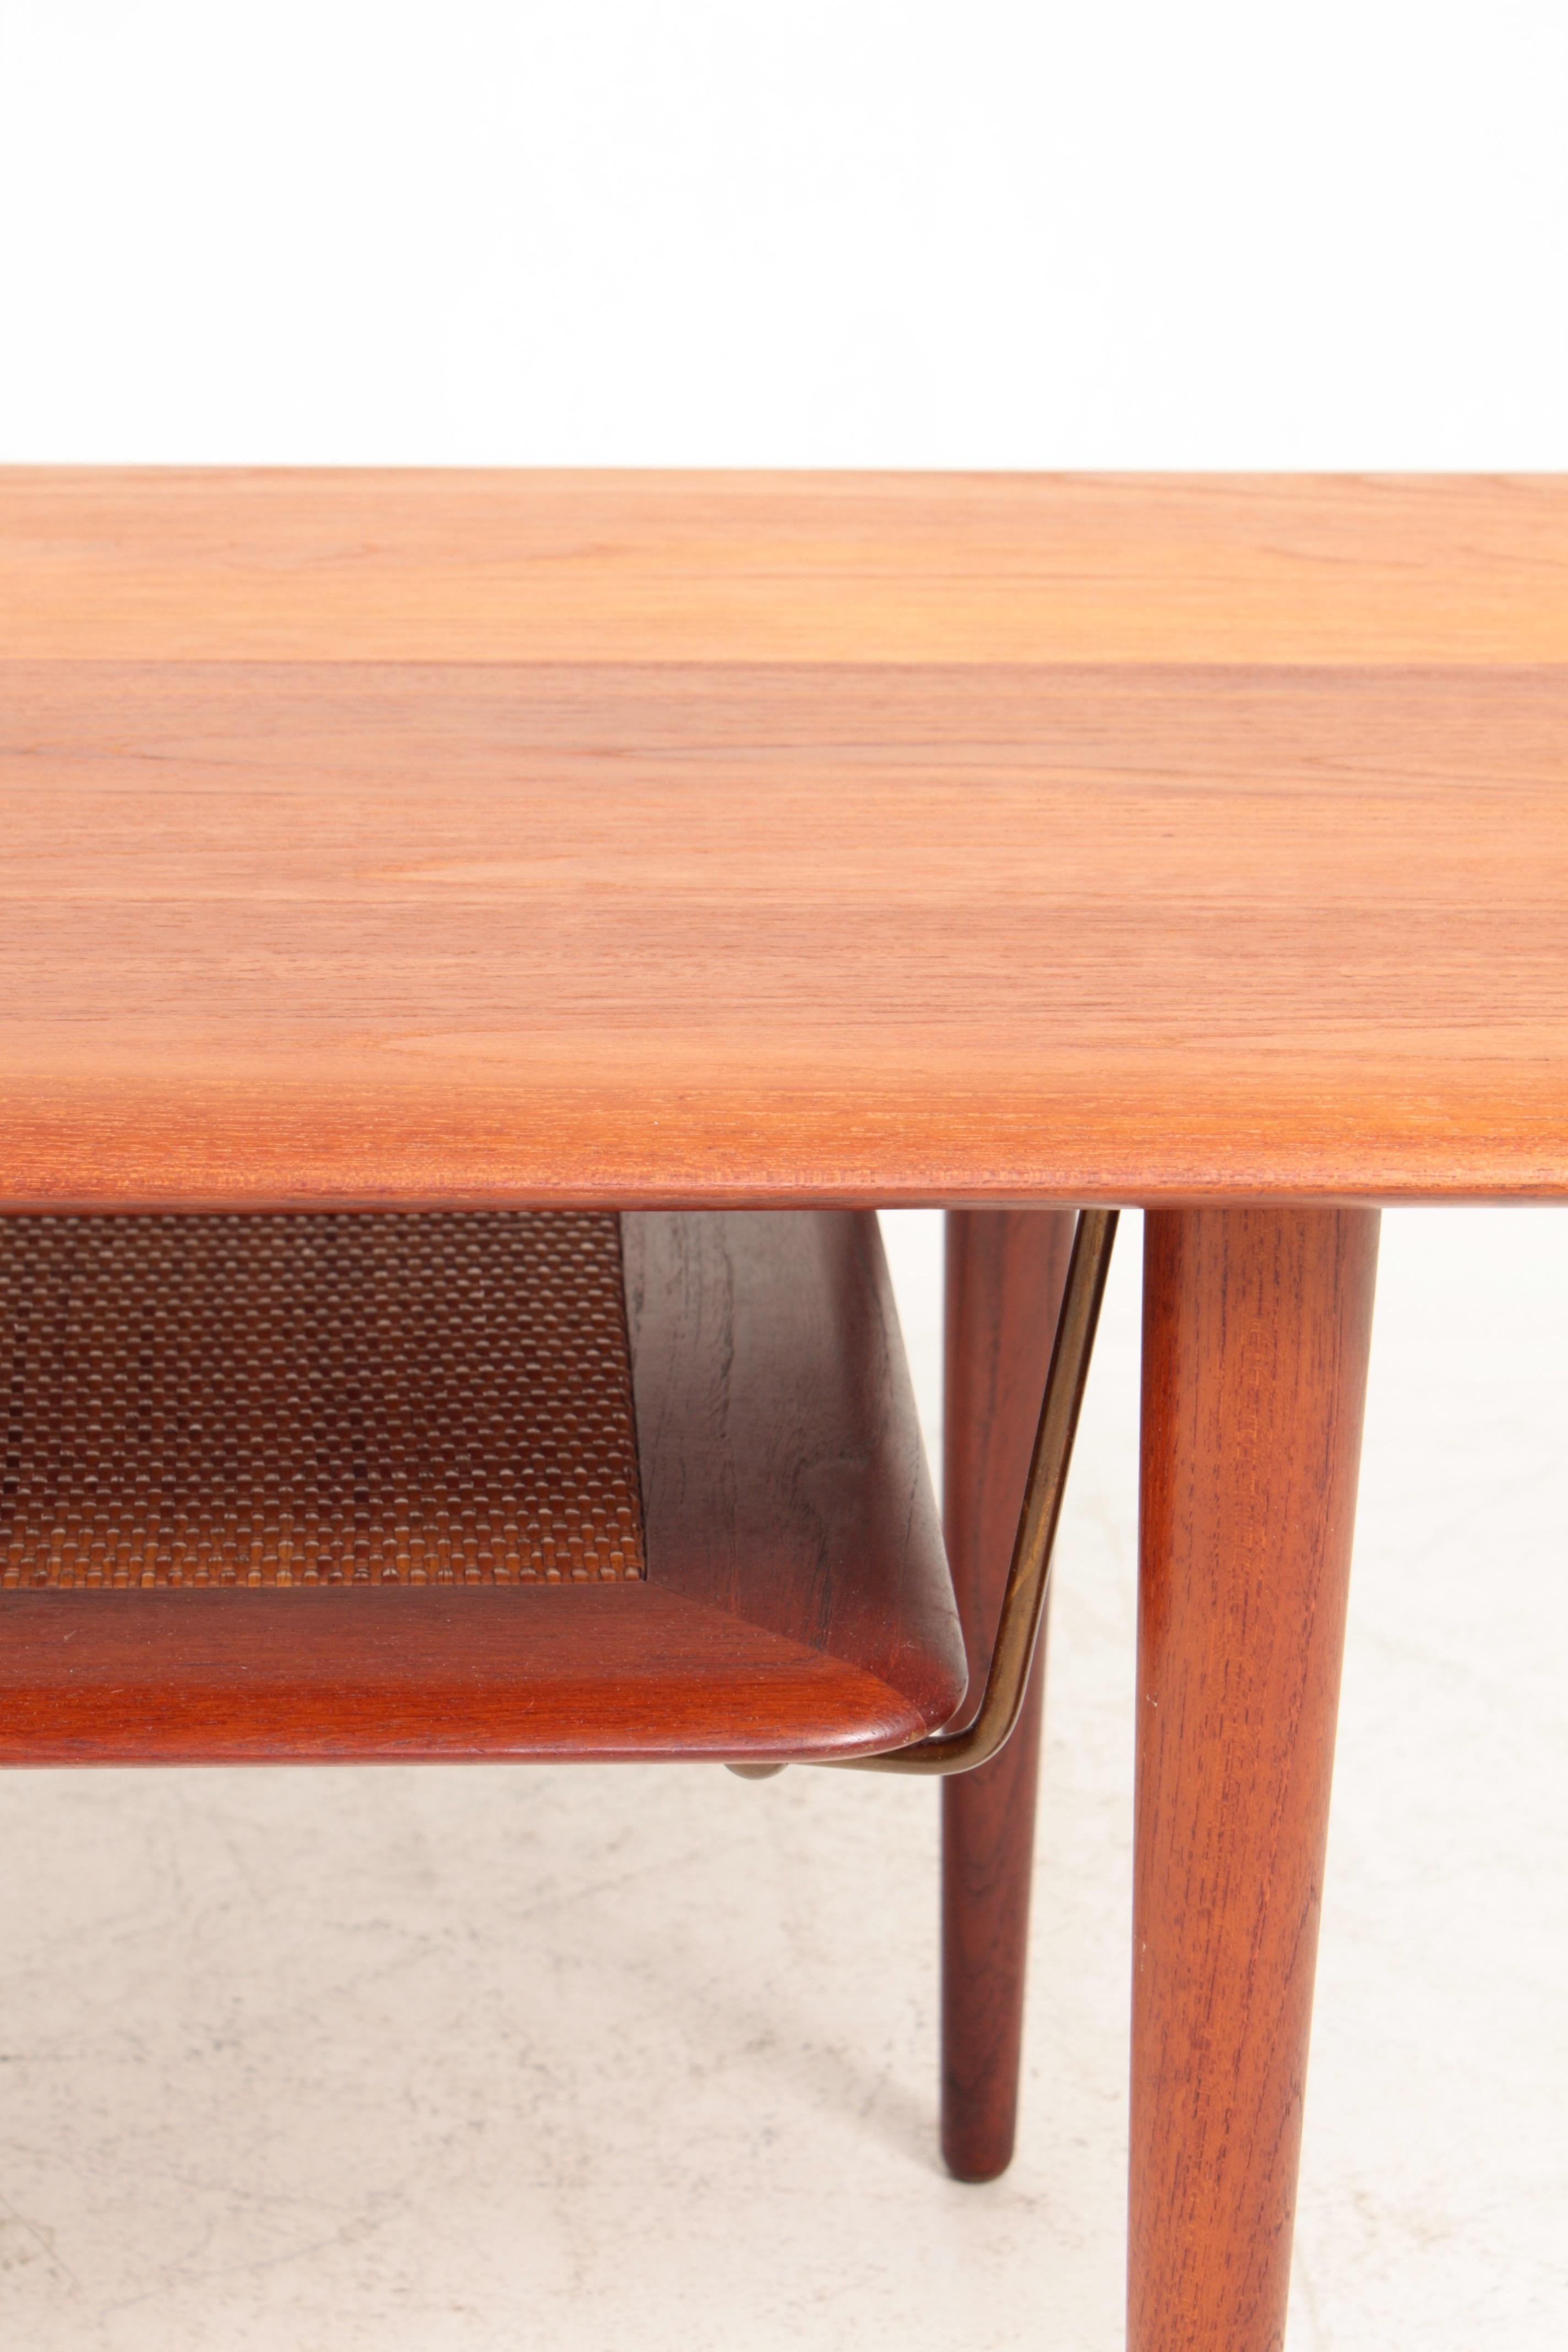 Scandinavian Modern Midcentury Low Table in Solid Teak and Cane by Hvidt & Mølgaard, Made in Denmark For Sale